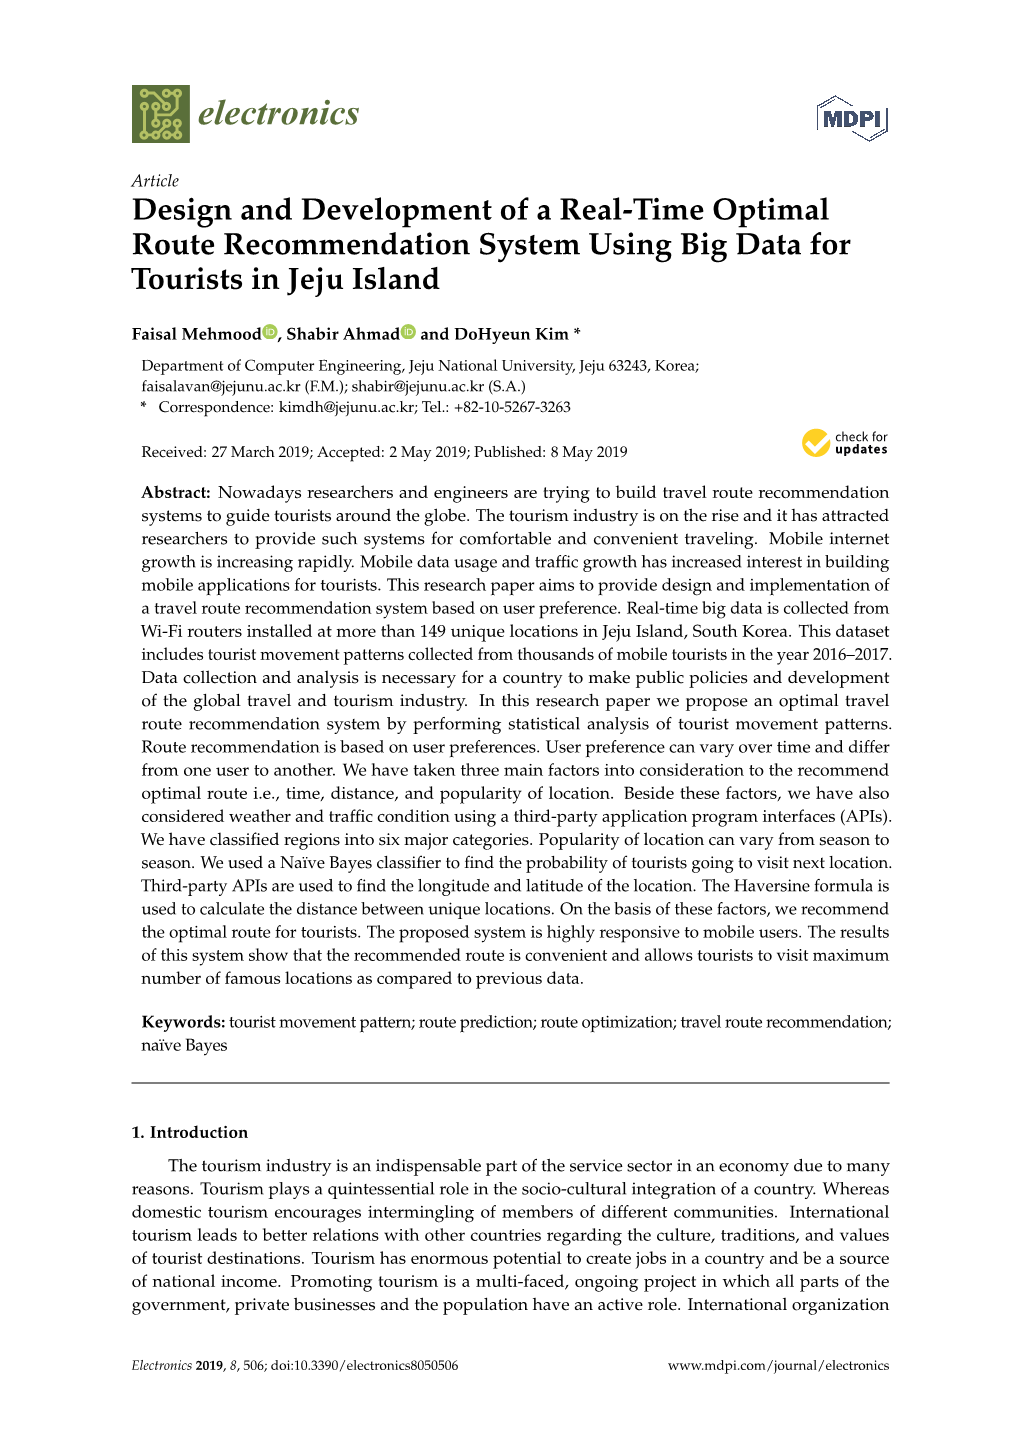 Design and Development of a Real-Time Optimal Route Recommendation System Using Big Data for Tourists in Jeju Island